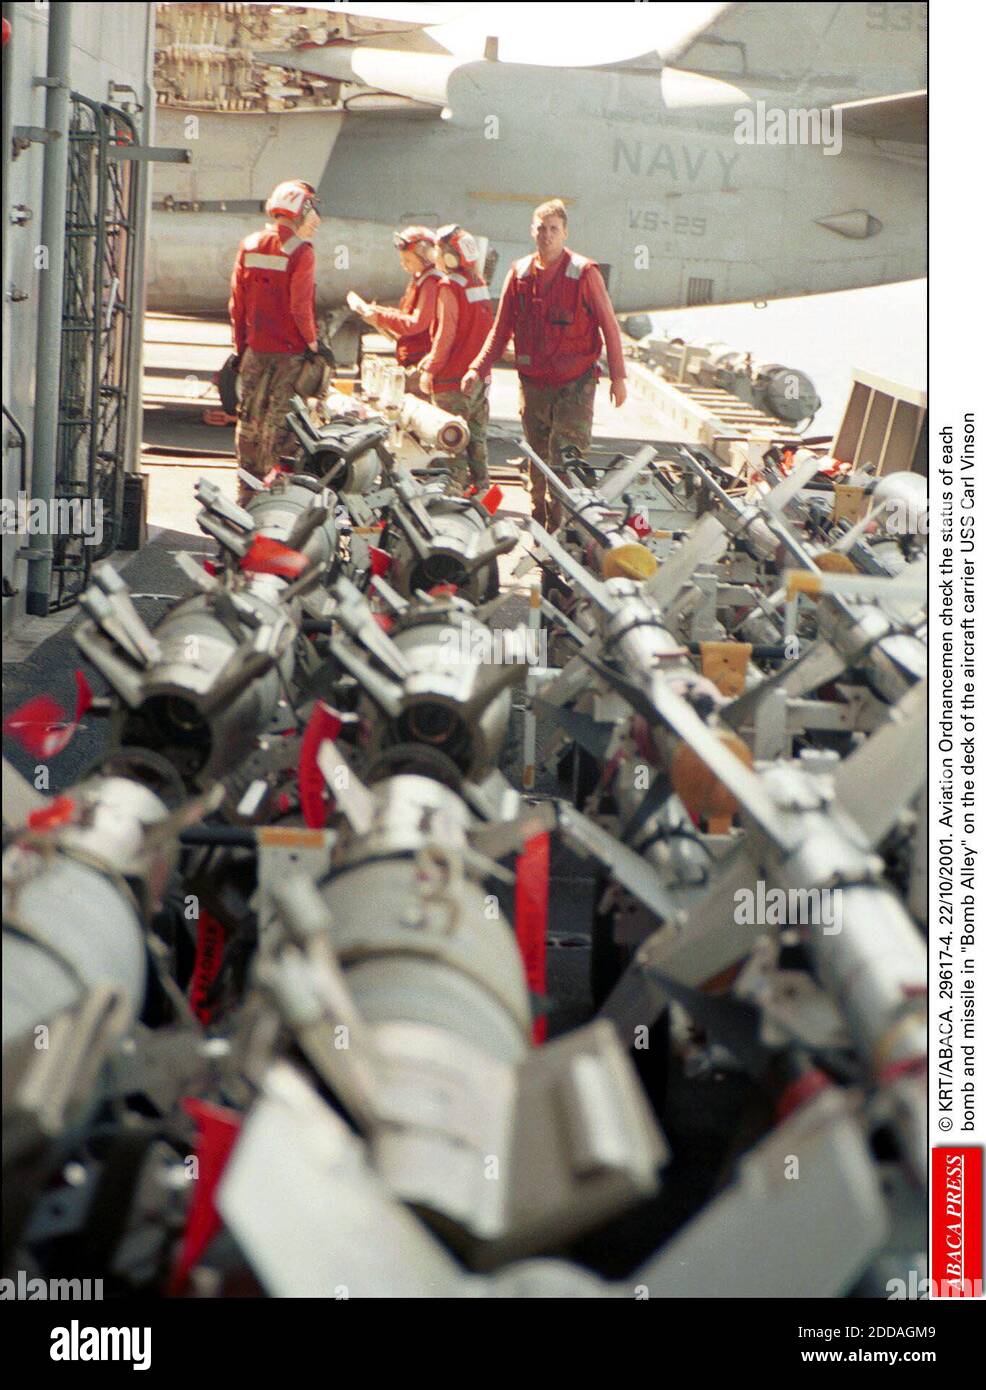 NO FILM, NO VIDEO, NO TV, NO DOCUMENTARY - © KRT/ABACA. 29617-4. 22/10/2001. Aviation Ordnancemen check the status of each bomb and missile in Bomb Alley on the deck of the aircraft carrier USS Carl Vinson Stock Photo